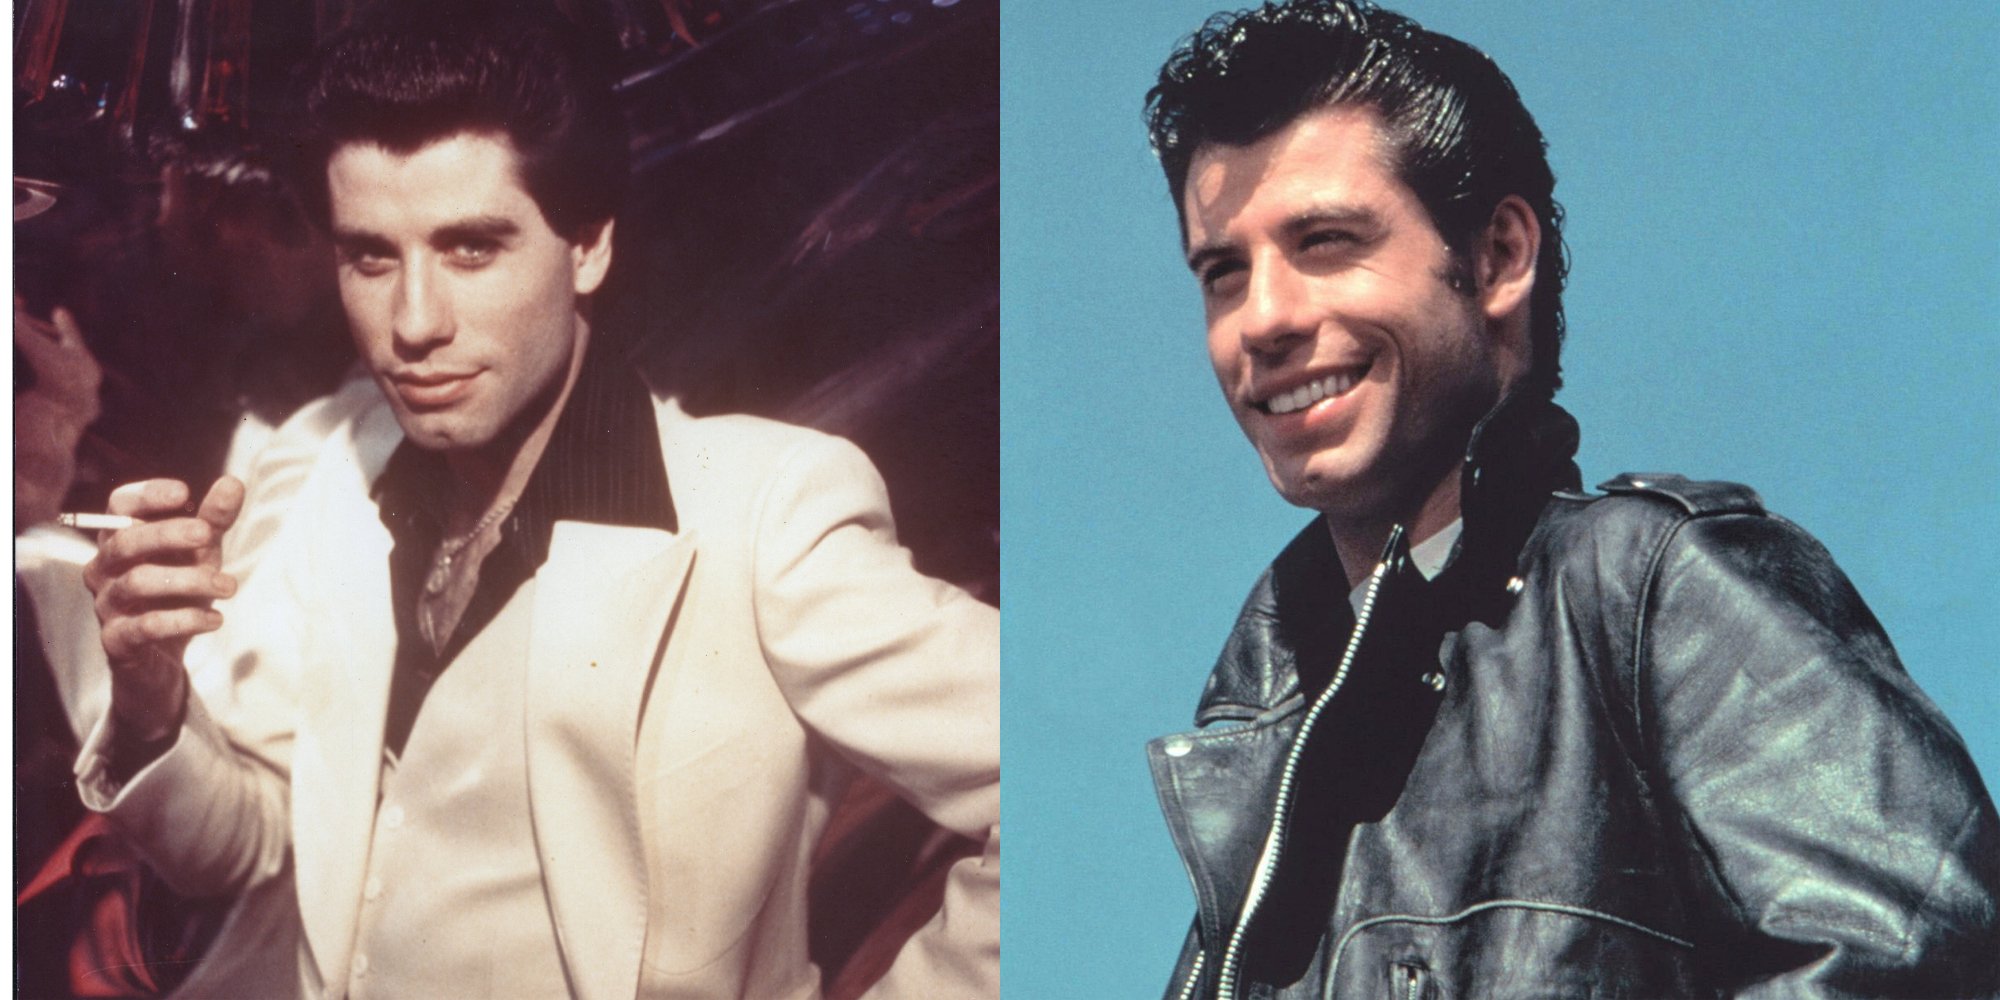 John Travolta in side by side photographs for both 'Saturday Night Fever' and 'Grease.'